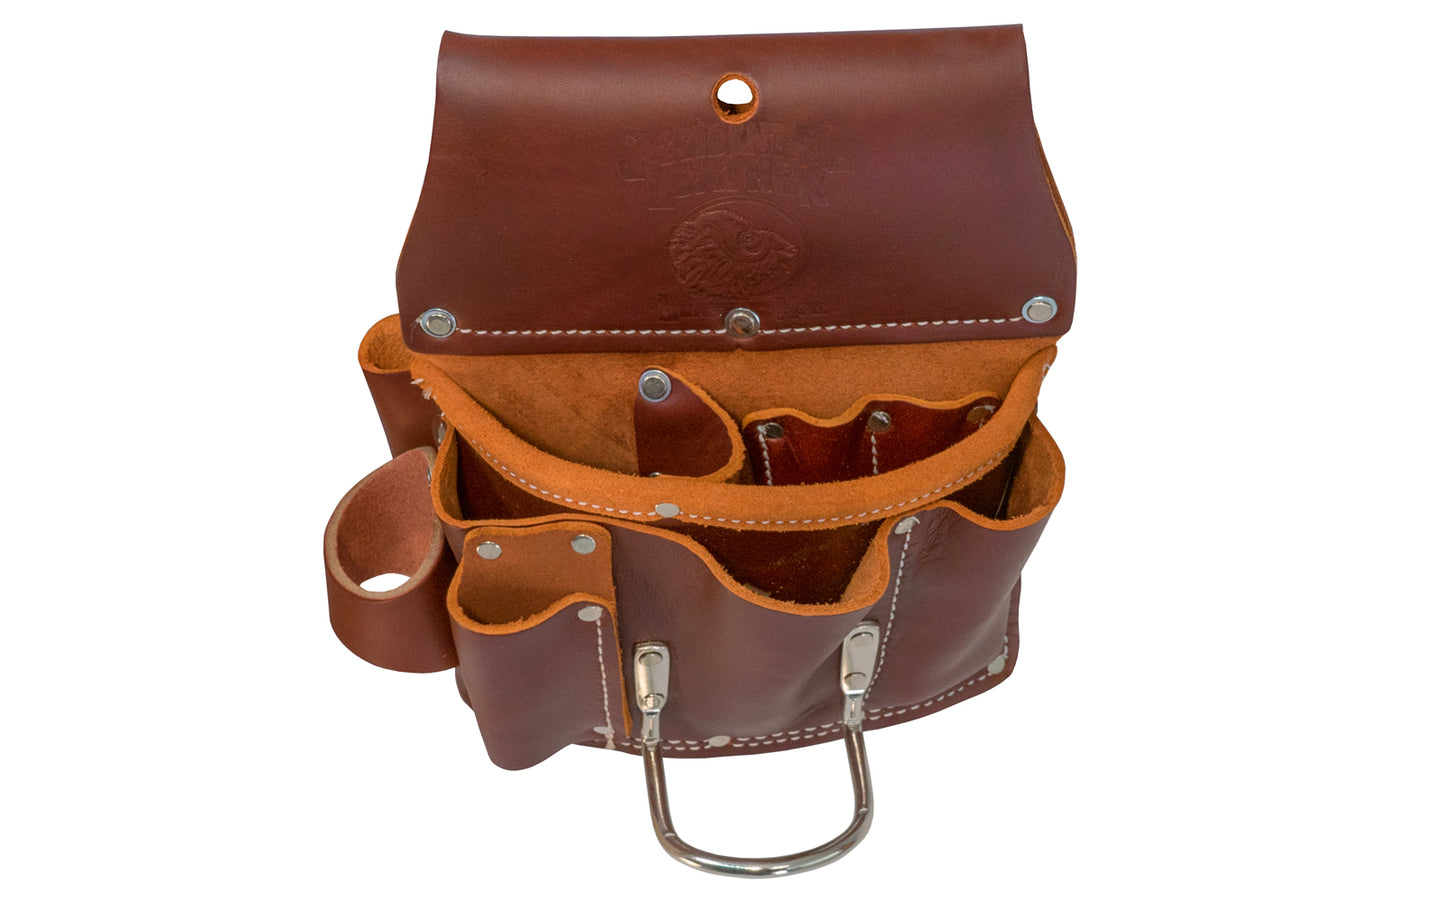 Occidental Leather Pro Drywall Bag ~ Model 5070 - Fits a 3" work belt - Pouch - 11 total pockets & tool holders - Genuine leather - Made in USA - Leather Bag - Tool Bag - 759244010008 - Holders for circle cutter, metal snips, saw, knife, Surform tools, pencils - Leather -  For both lathers & drywall pros - Drywall Bag